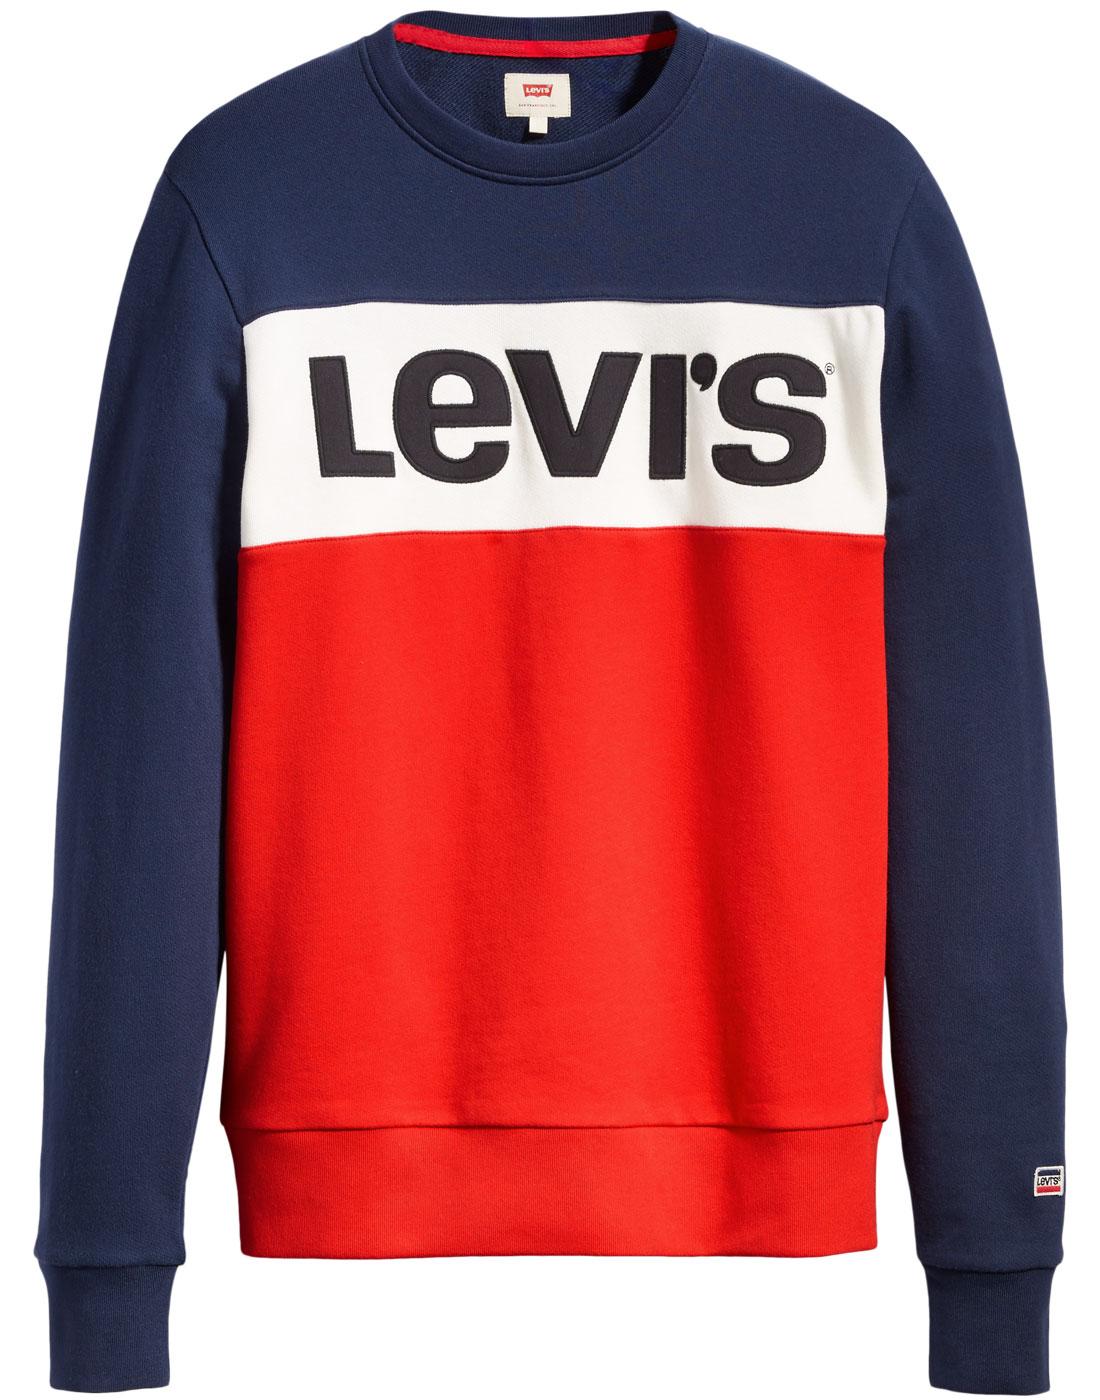 levi's hoodie with sports vintage logo